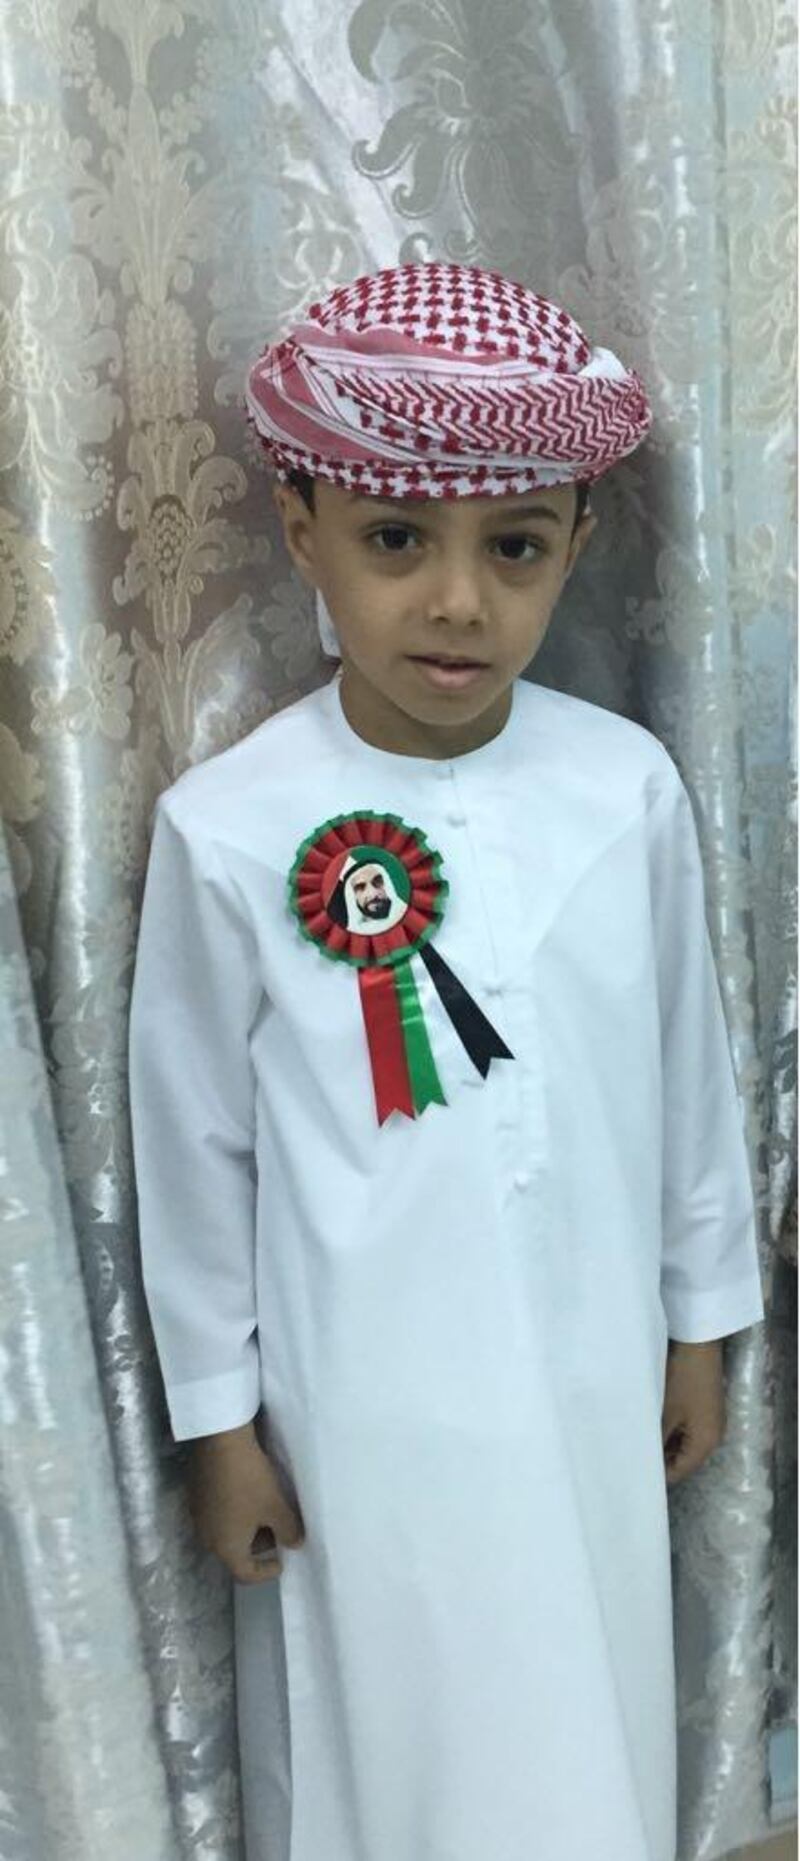 Hamad Alyaarbi’s life is returning to normal after a stem cell transplant from his younger brother cured his blood disorder. Courtesy: CryoSave Arabia